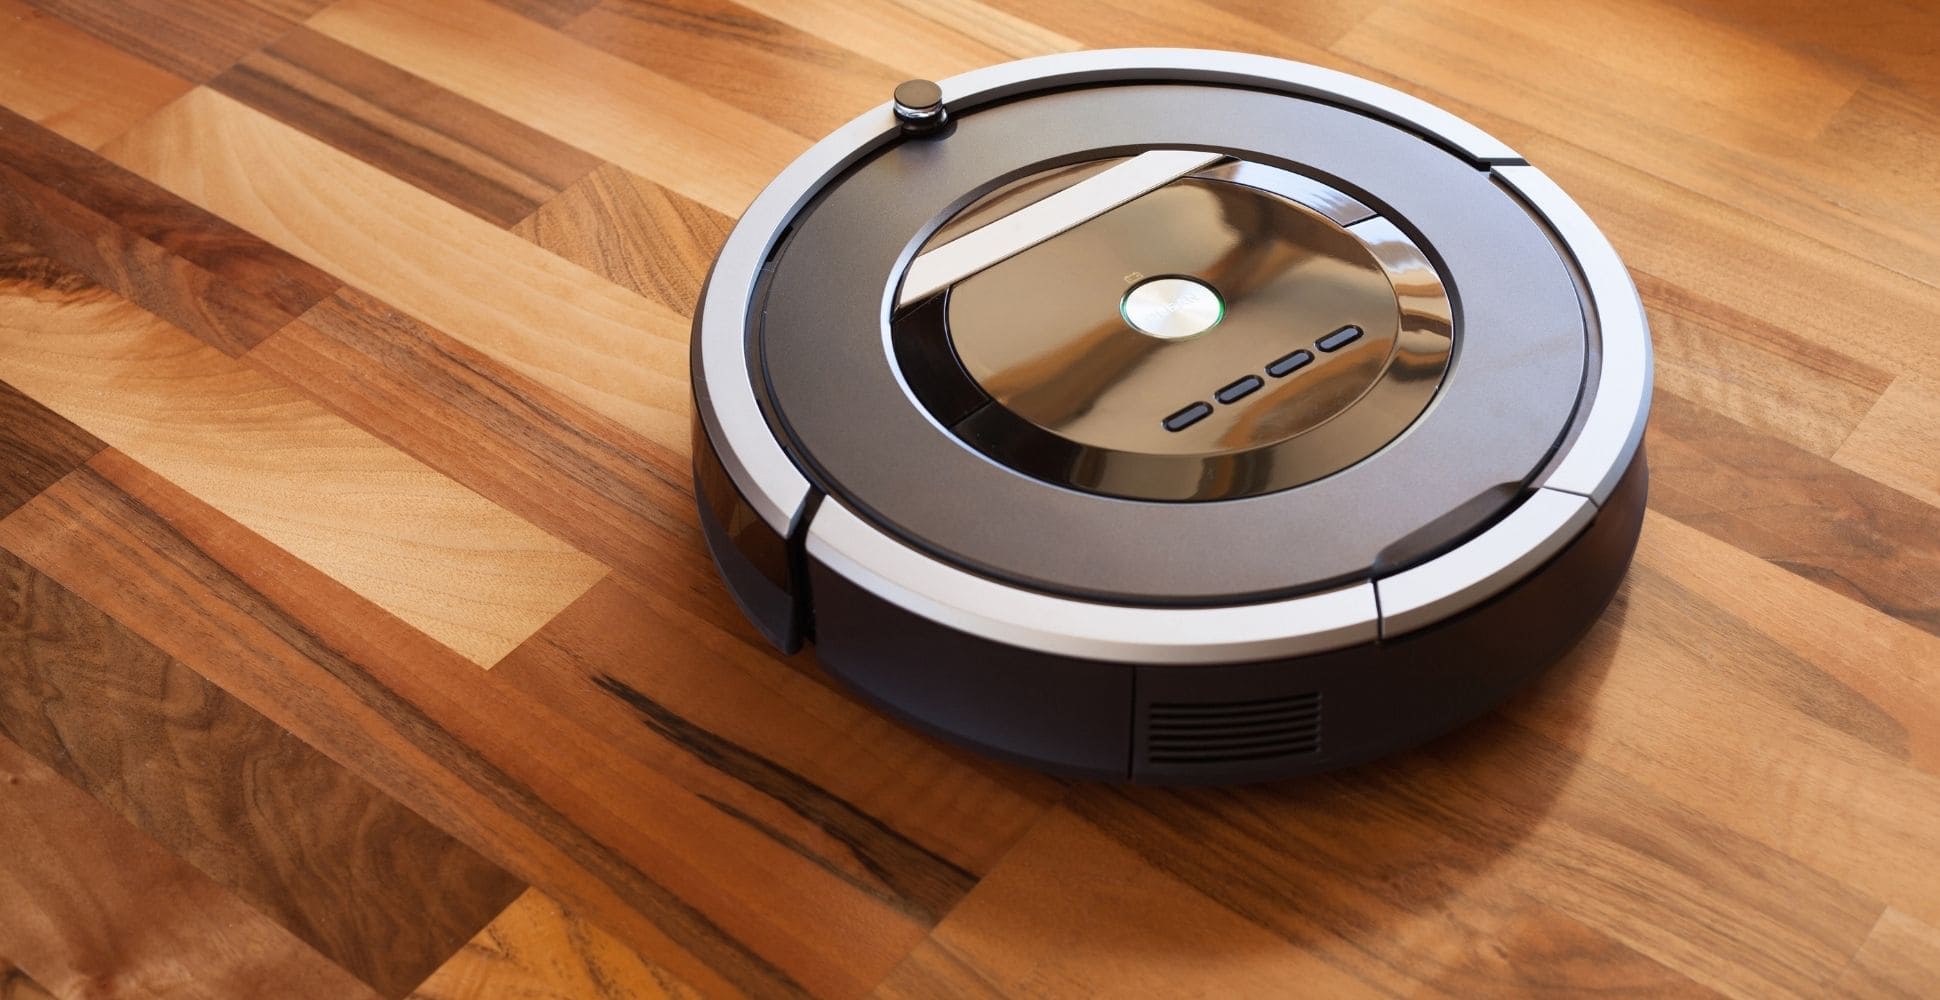 black and white robot vacuum cleaning on light brown hardwood floors - image by spruceup